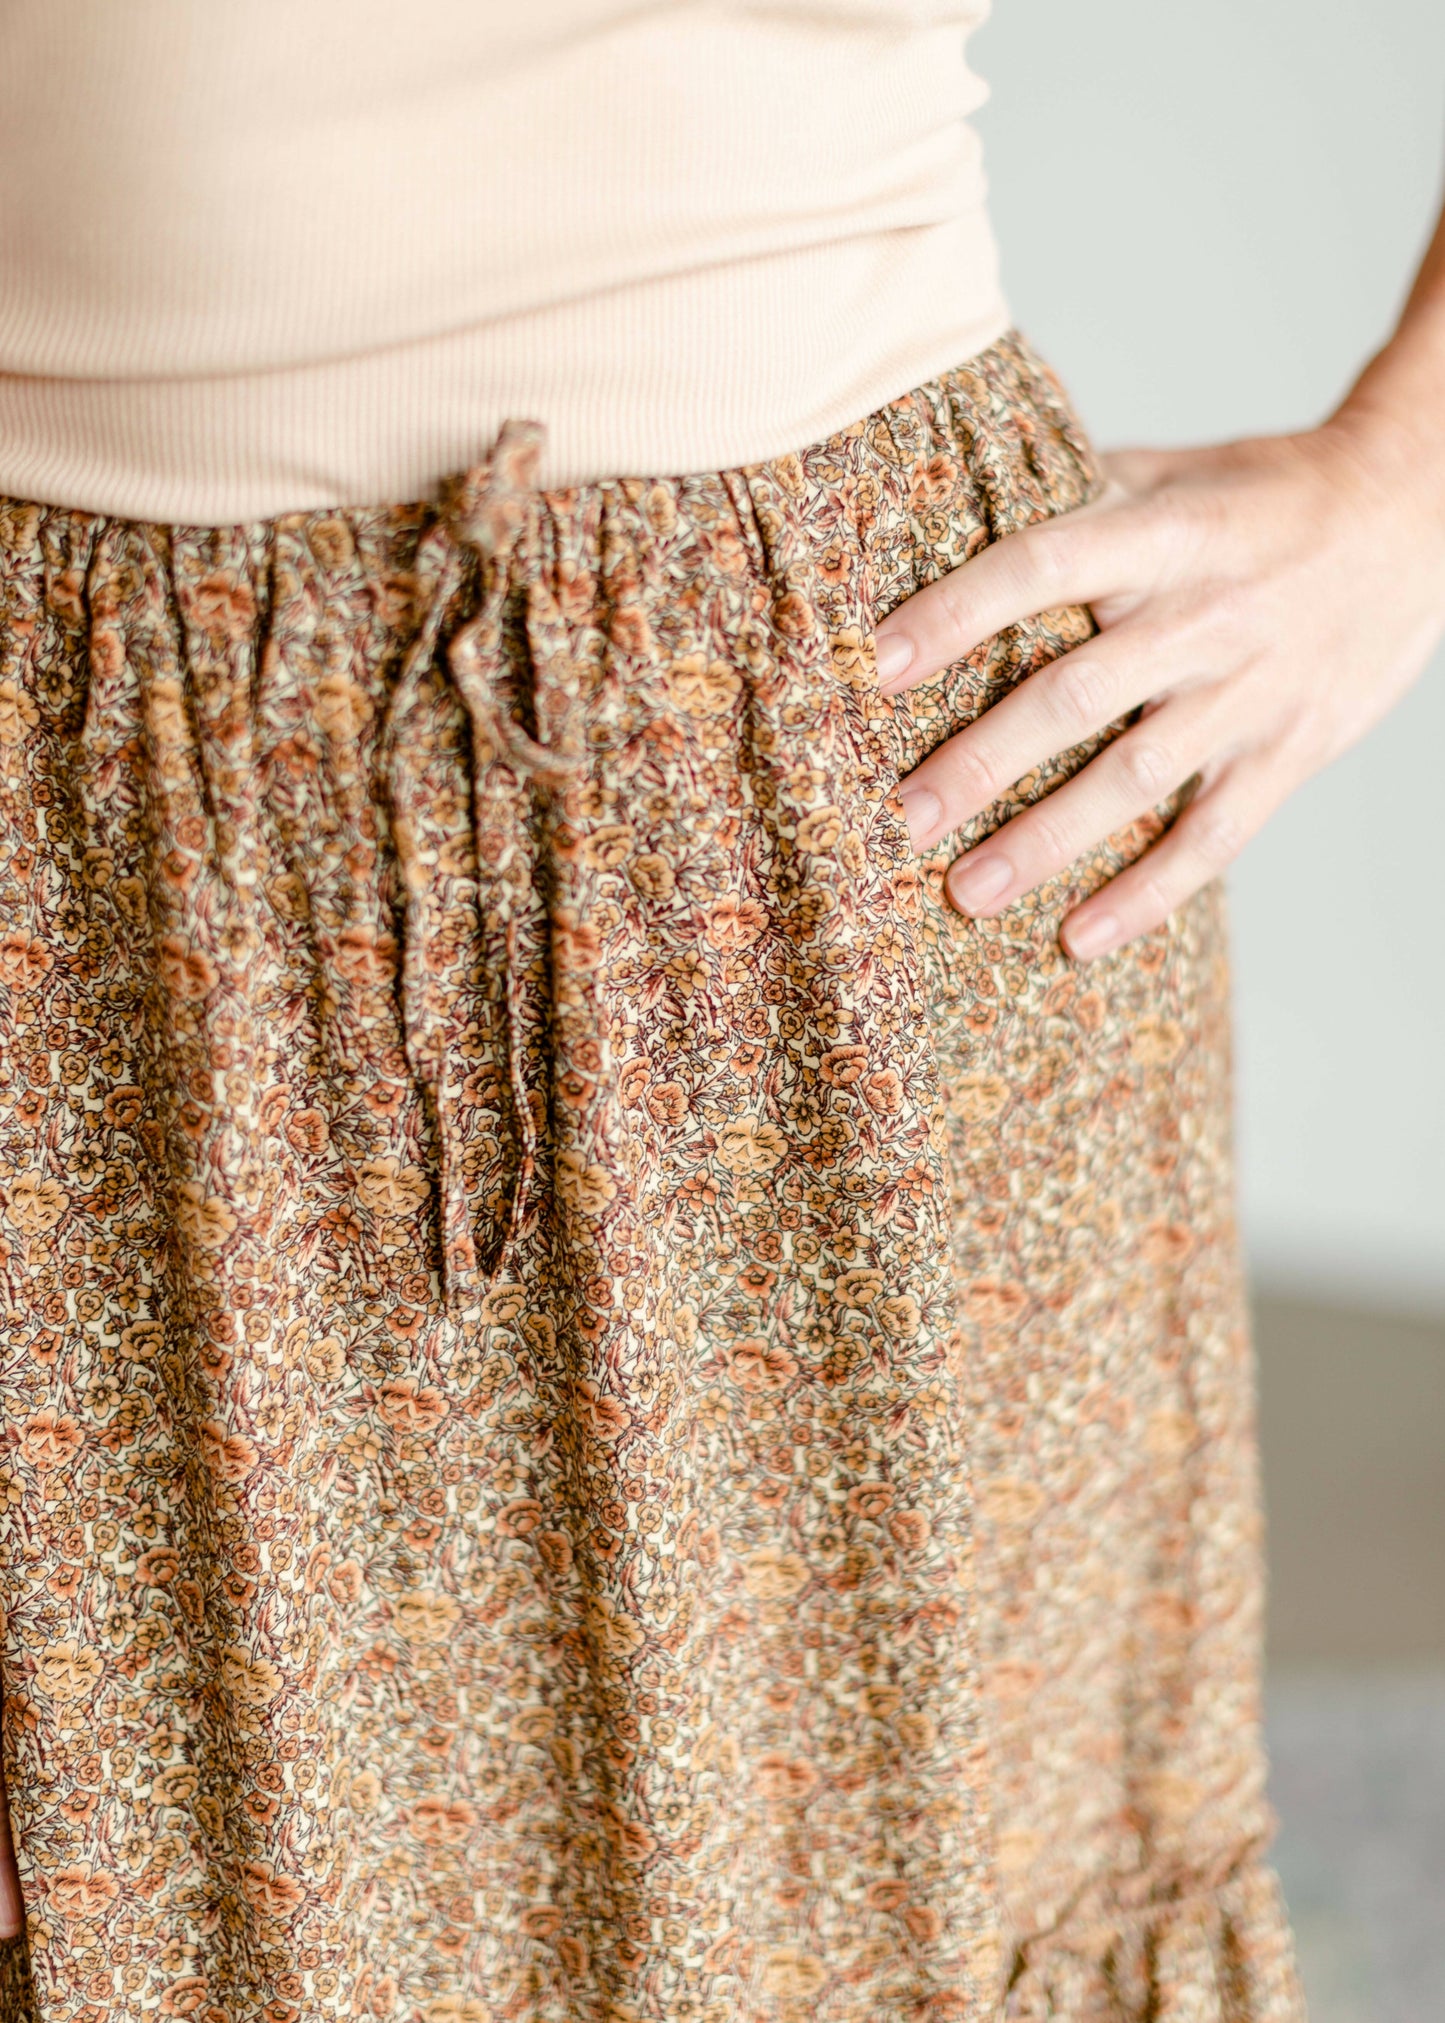 Adelaide Floral Maxi Skirt